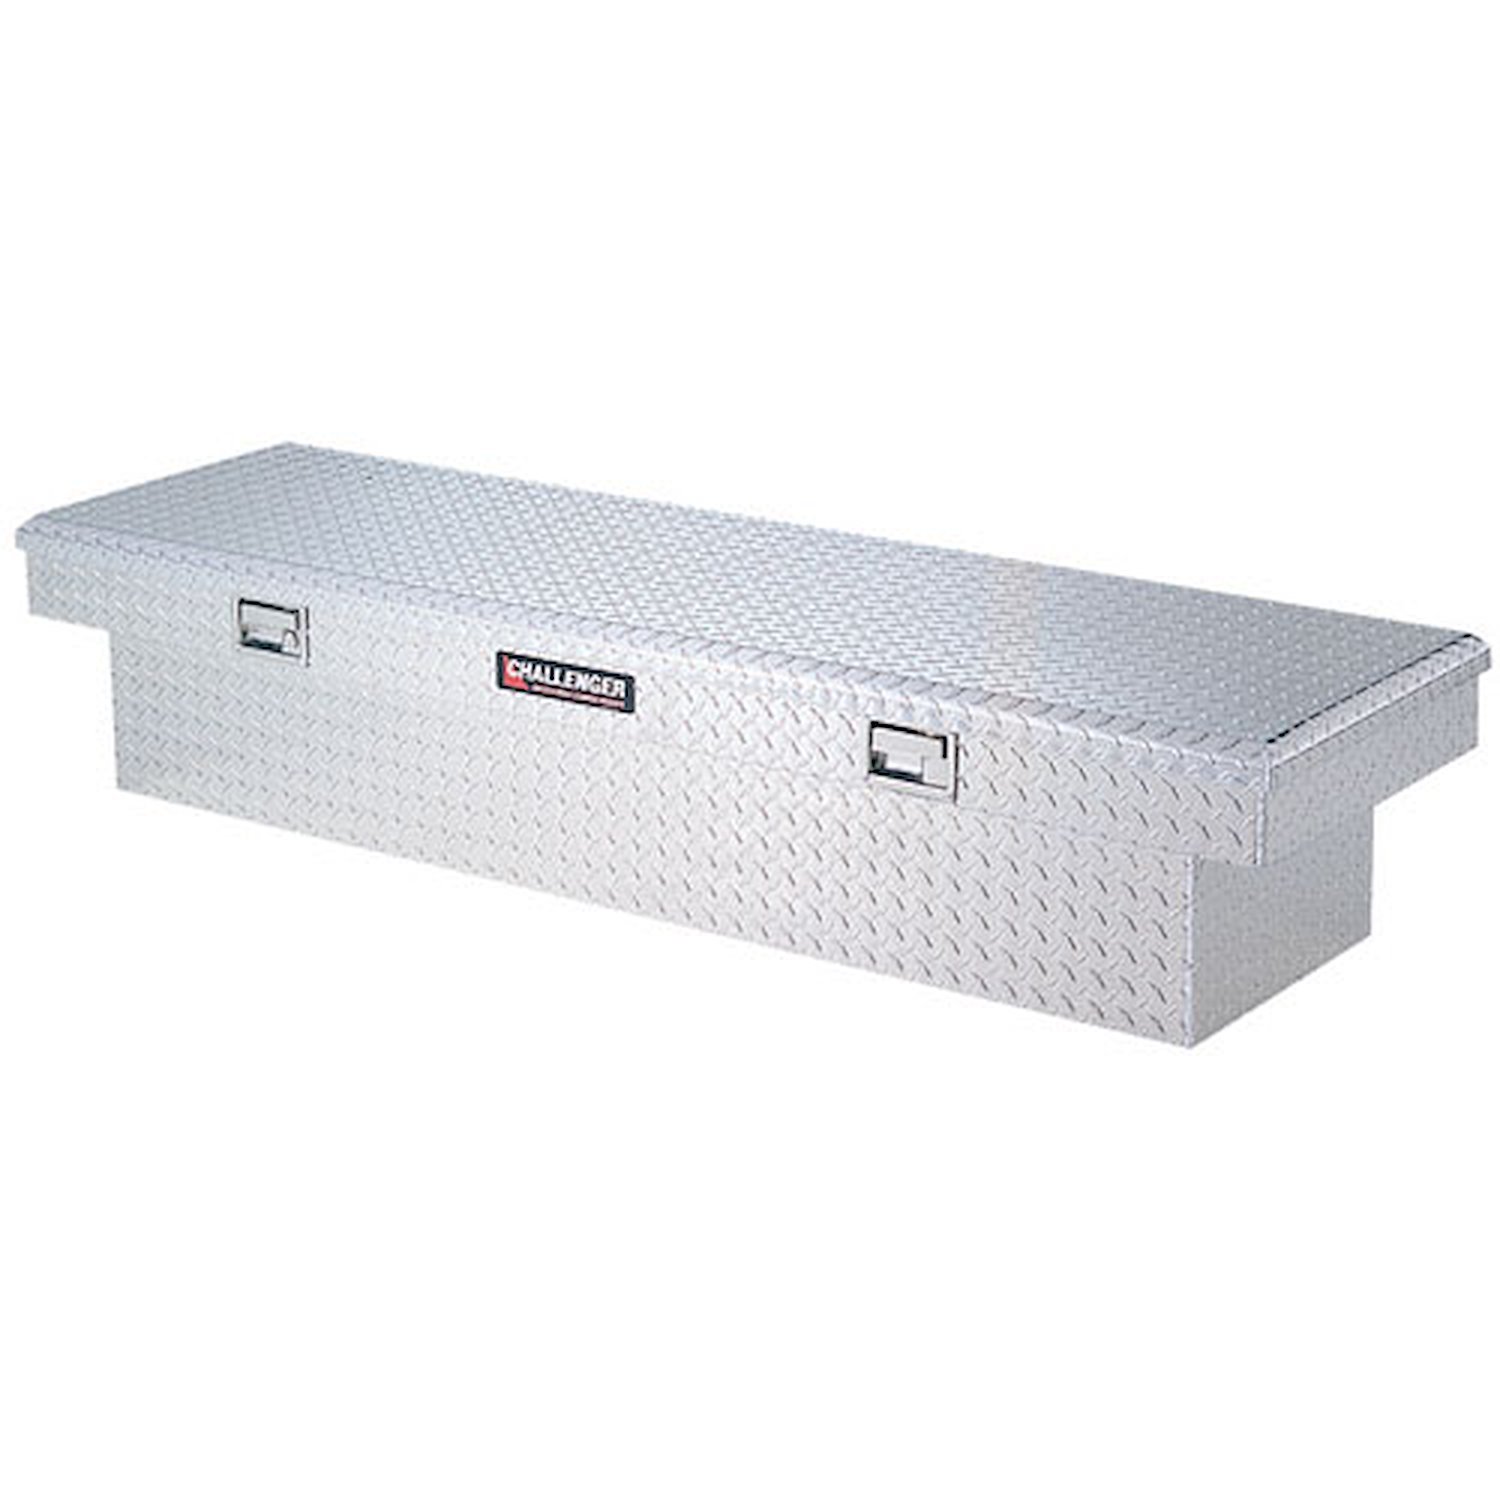 Truck Bed Challenger Tool Box Length: 63.25"